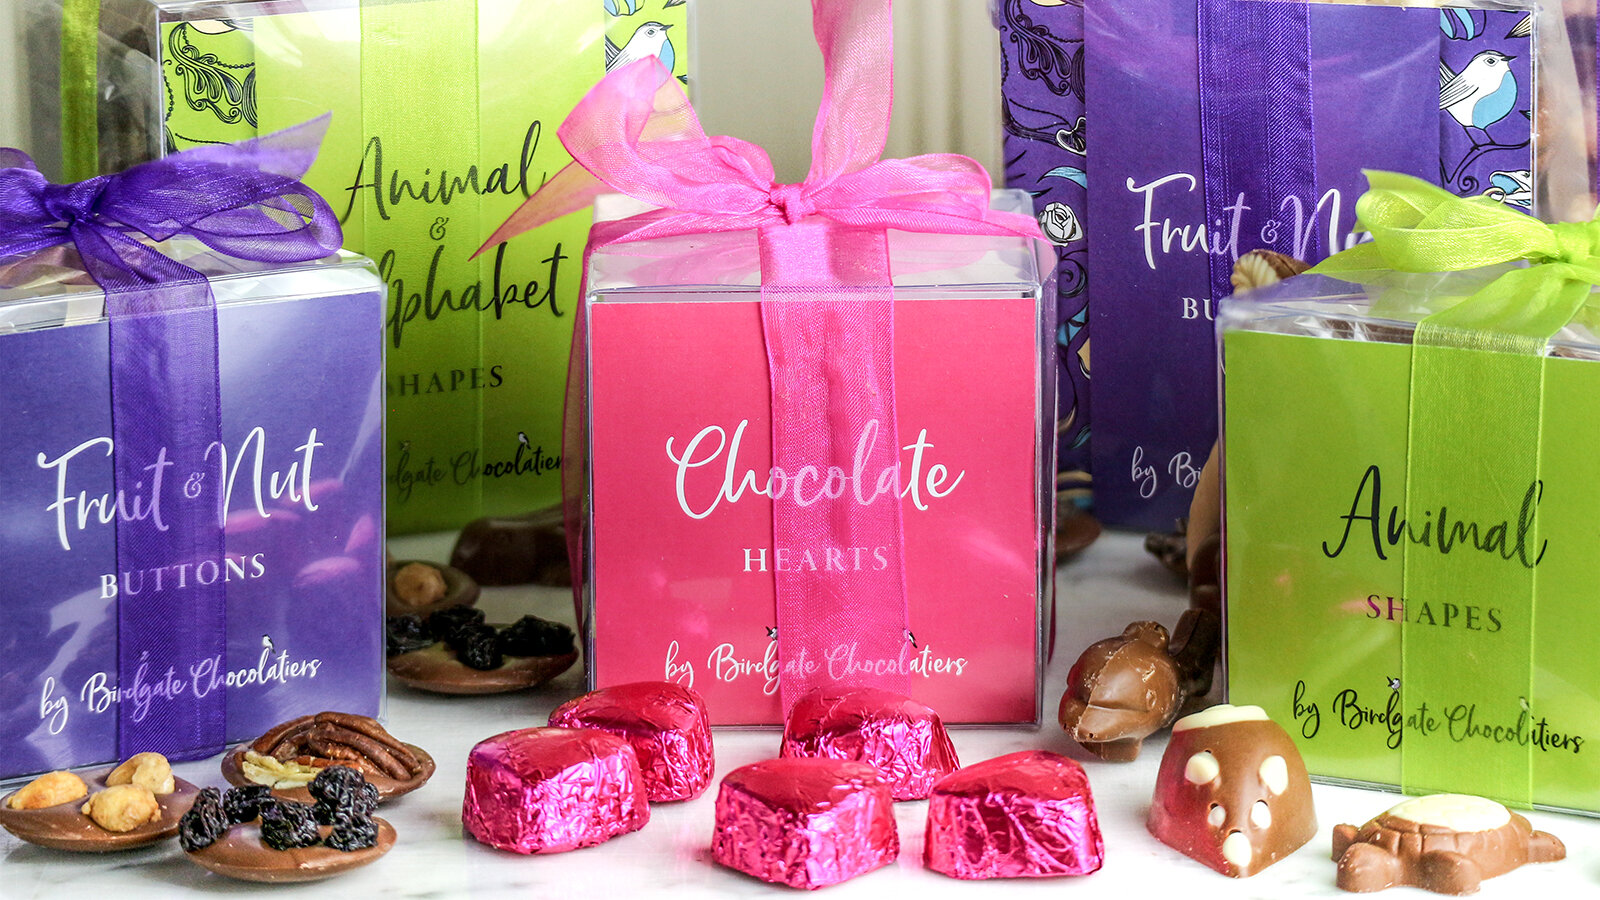 Birdgate-Chocolatiers-Chocolate-HOME-Banner-16-9 CUBE COLLECTION v1.jpg